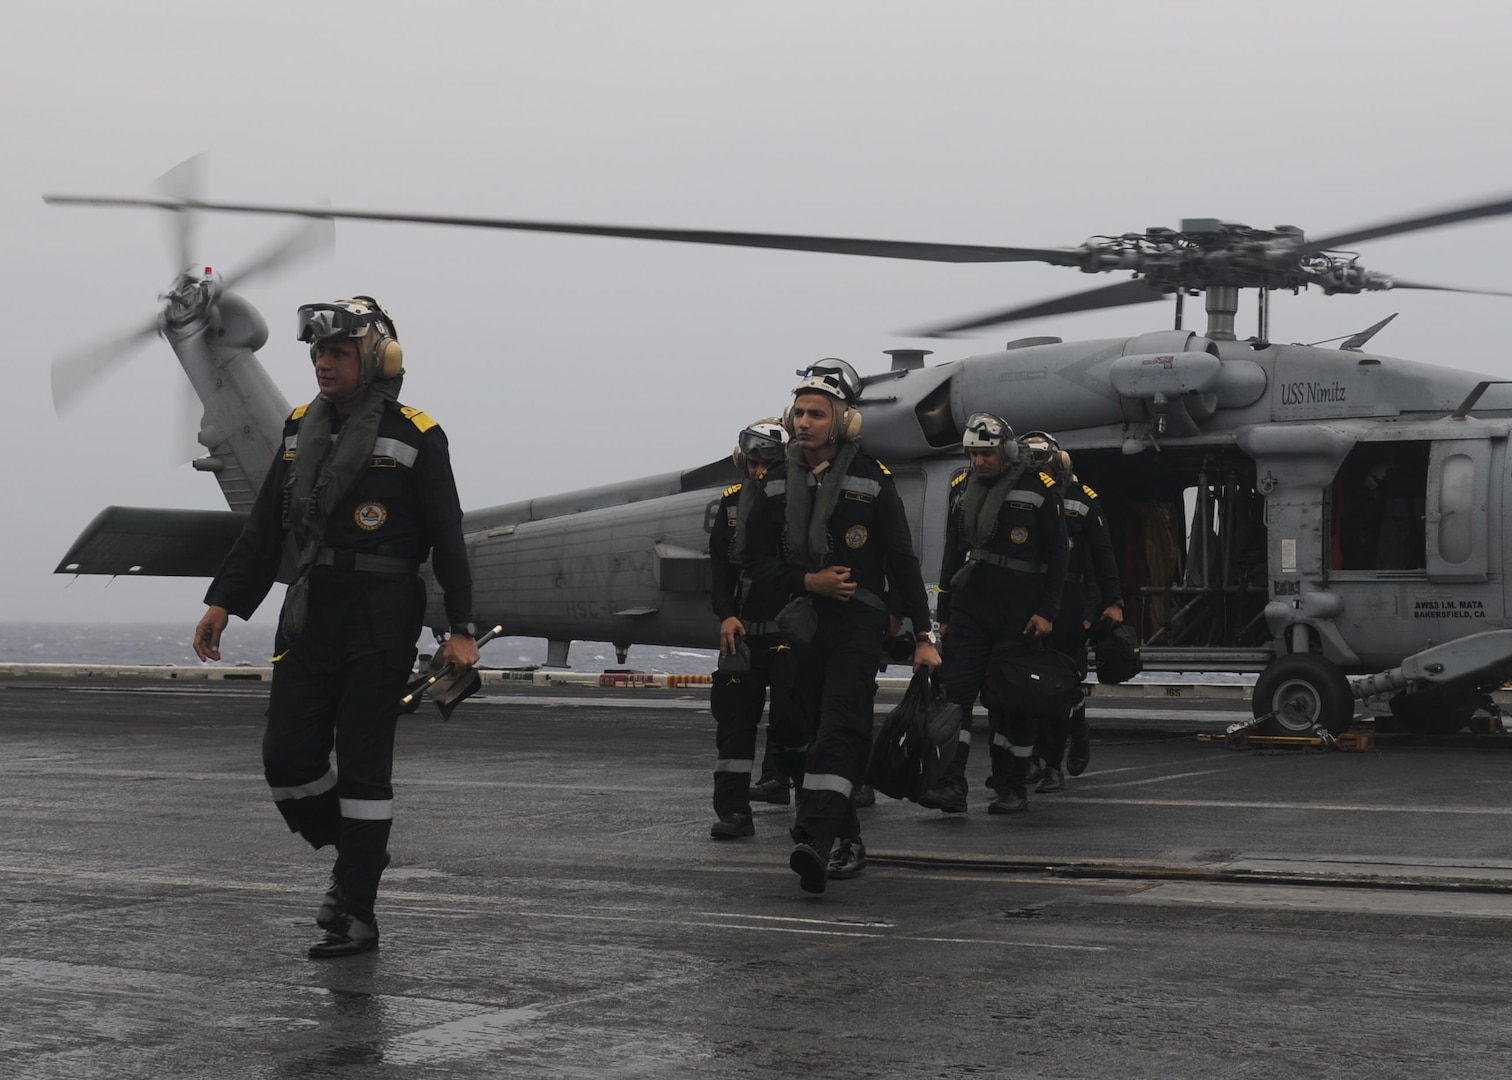 BAY OF BENGAL (July 17, 2017) Indian Navy Rear Admiral Biswajit Dasgupta, flag officer commanding eastern fleet, transits the flight deck of the aircraft carrier USS Nimitz (CVN 68) after arriving aboard via an MH-60R Seahawk helicopter from the "Eightballers" of Helicopter Sea Combat Squadron (HSC) 8 during an admiral visit as part of the conclusion of Exercise Malabar 2017, July 17, 2017 in the Bay of Bengal. Malabar 2017 is the latest in a continuing series of exercises between the Indian Navy, Japan Maritime Self-Defense Force and U.S. Navy that has grown in scope and complexity over the years to address the variety of shared threats to maritime security in the Indo-Asia-Pacific region. (U.S. Navy photo by Mass Communication Specialist 2nd Class Holly L. Herline)